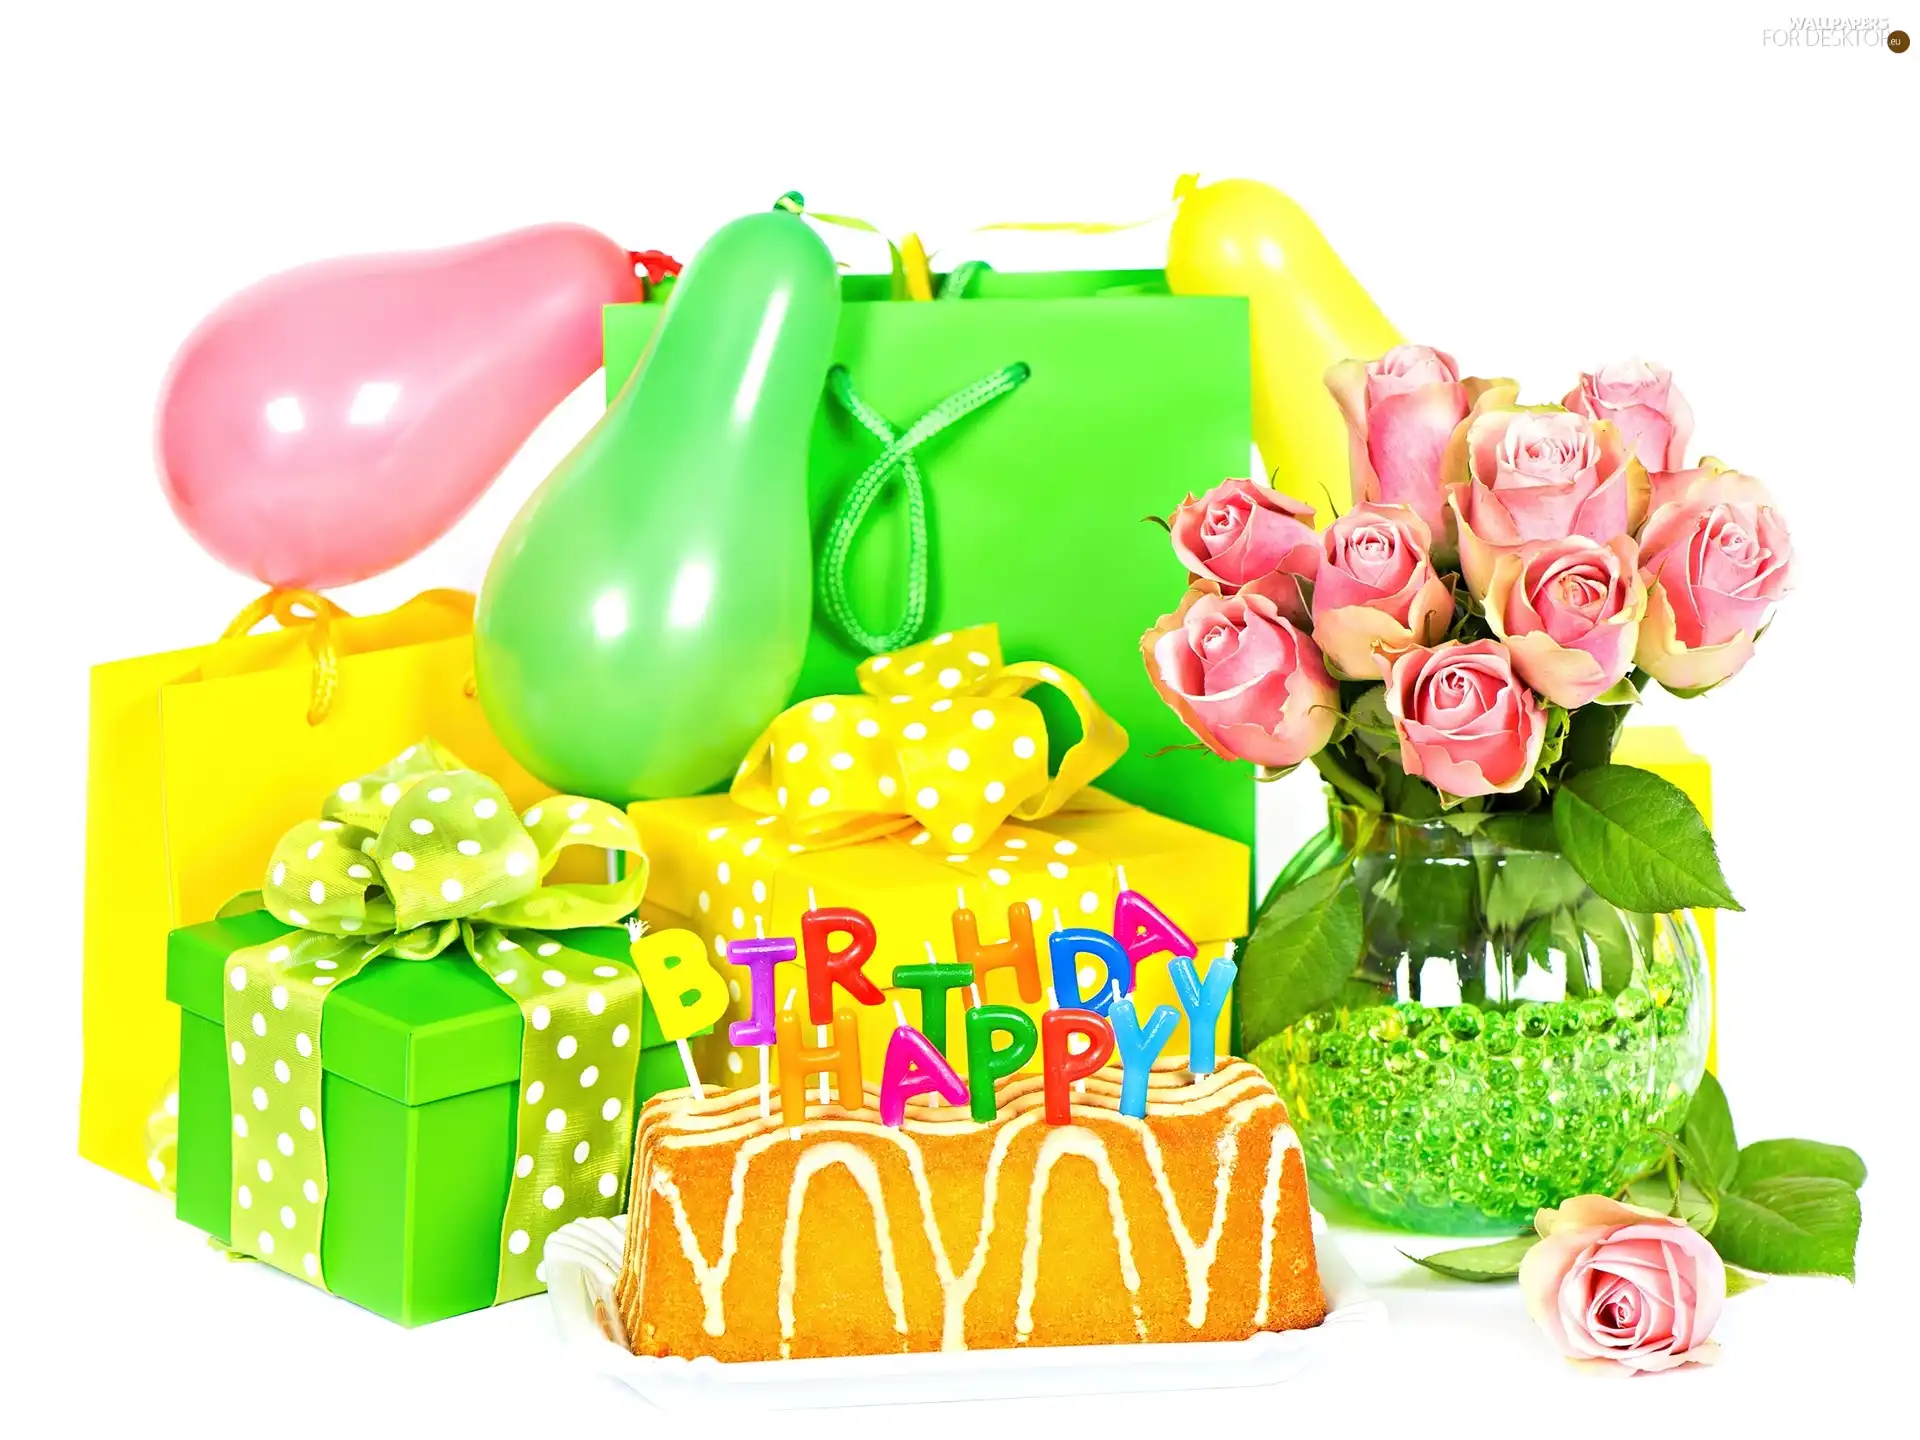 balloons, gifts, cake, Flowers